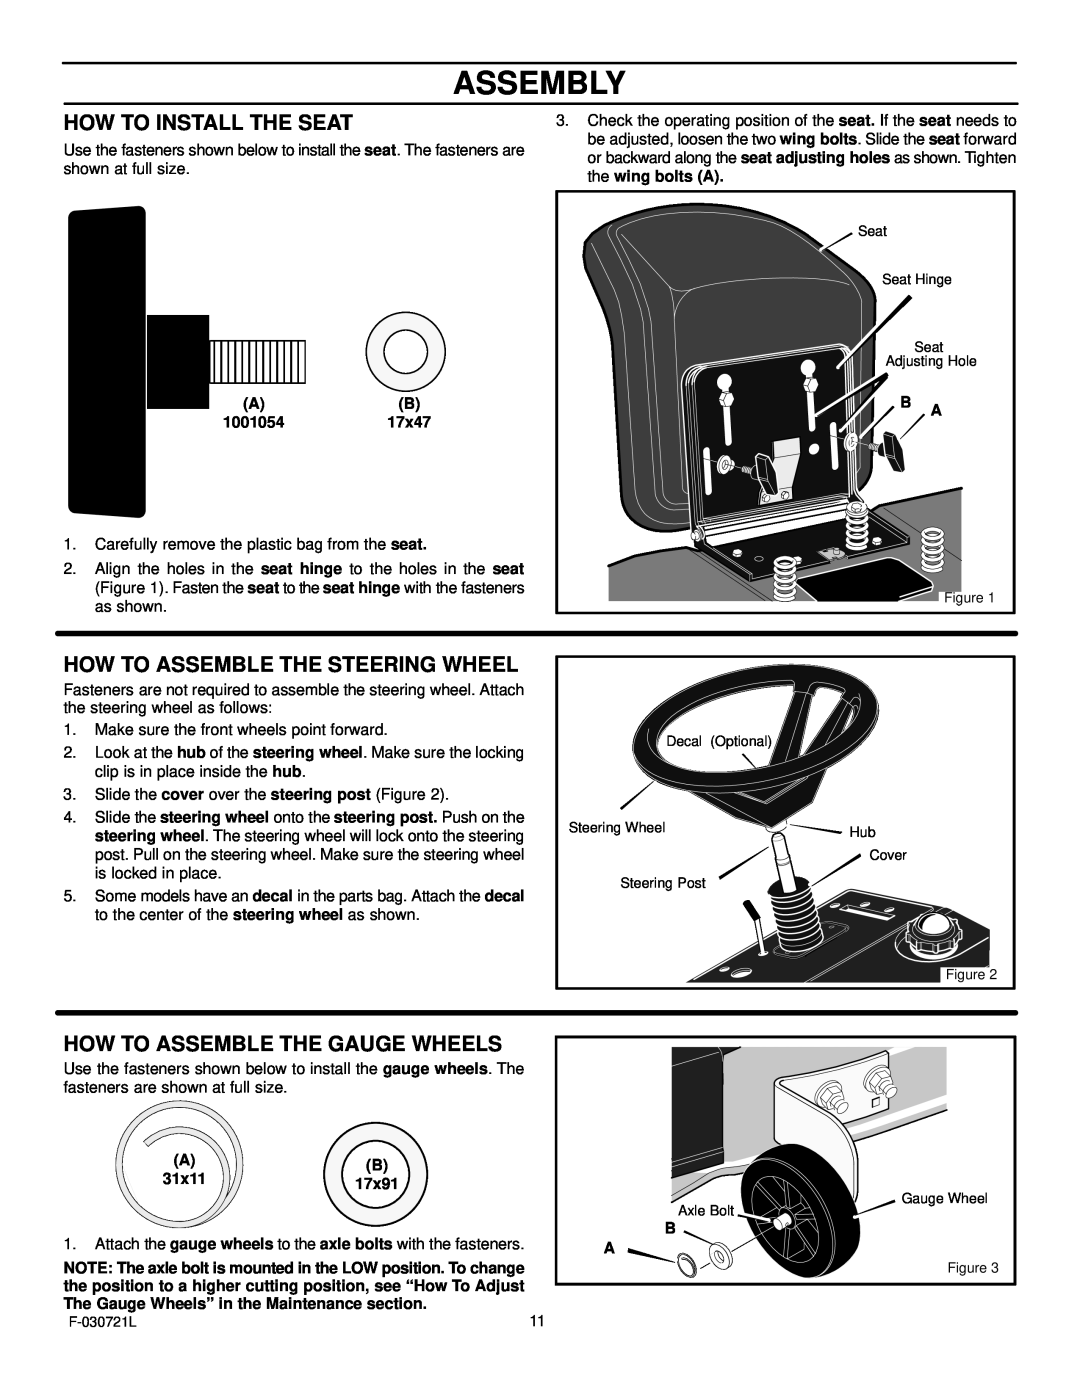 Murray 425007x92B Assembly, How To Install The Seat, How To Assemble The Steering Wheel, How To Assemble The Gauge Wheels 